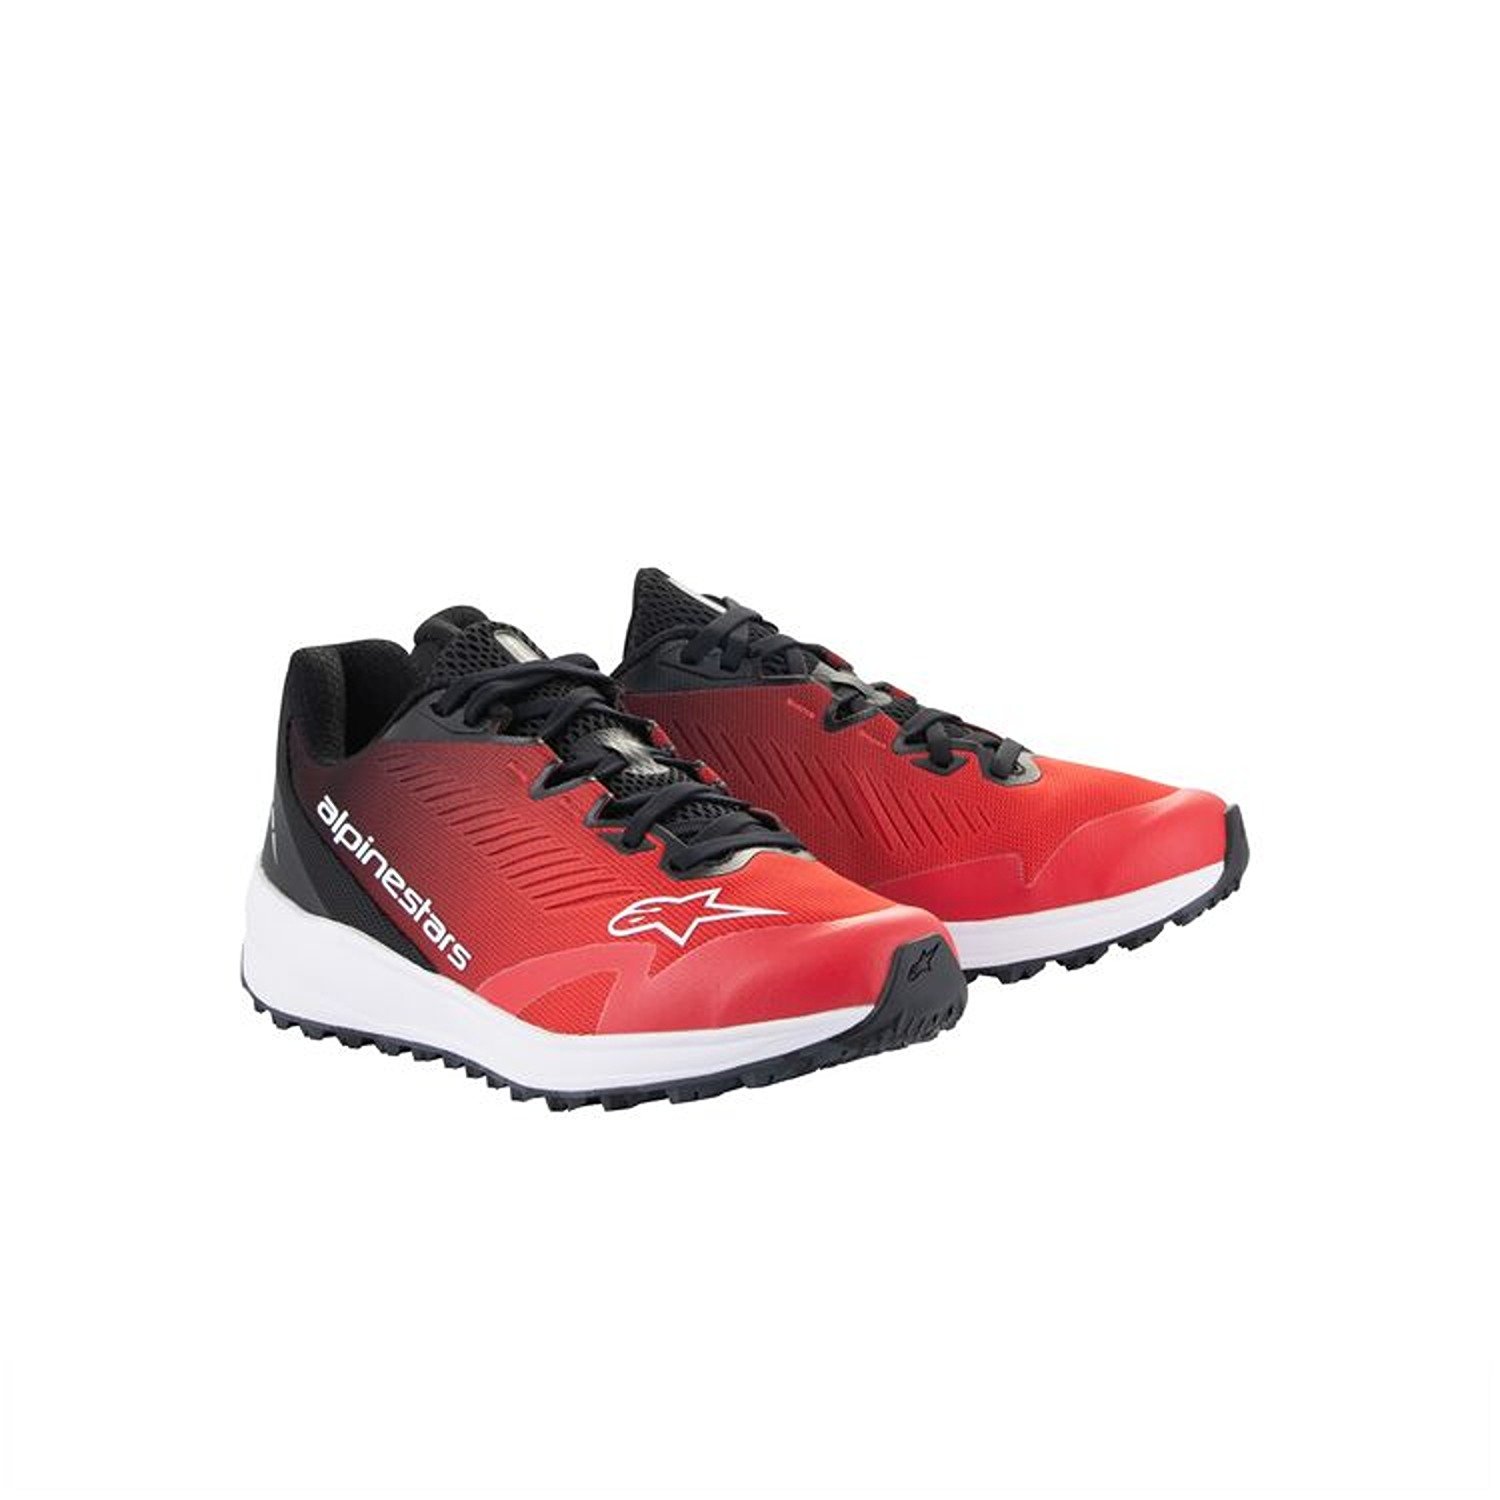 Image of Alpinestars Meta Road V2 Shoes Red Black White Taille US 9